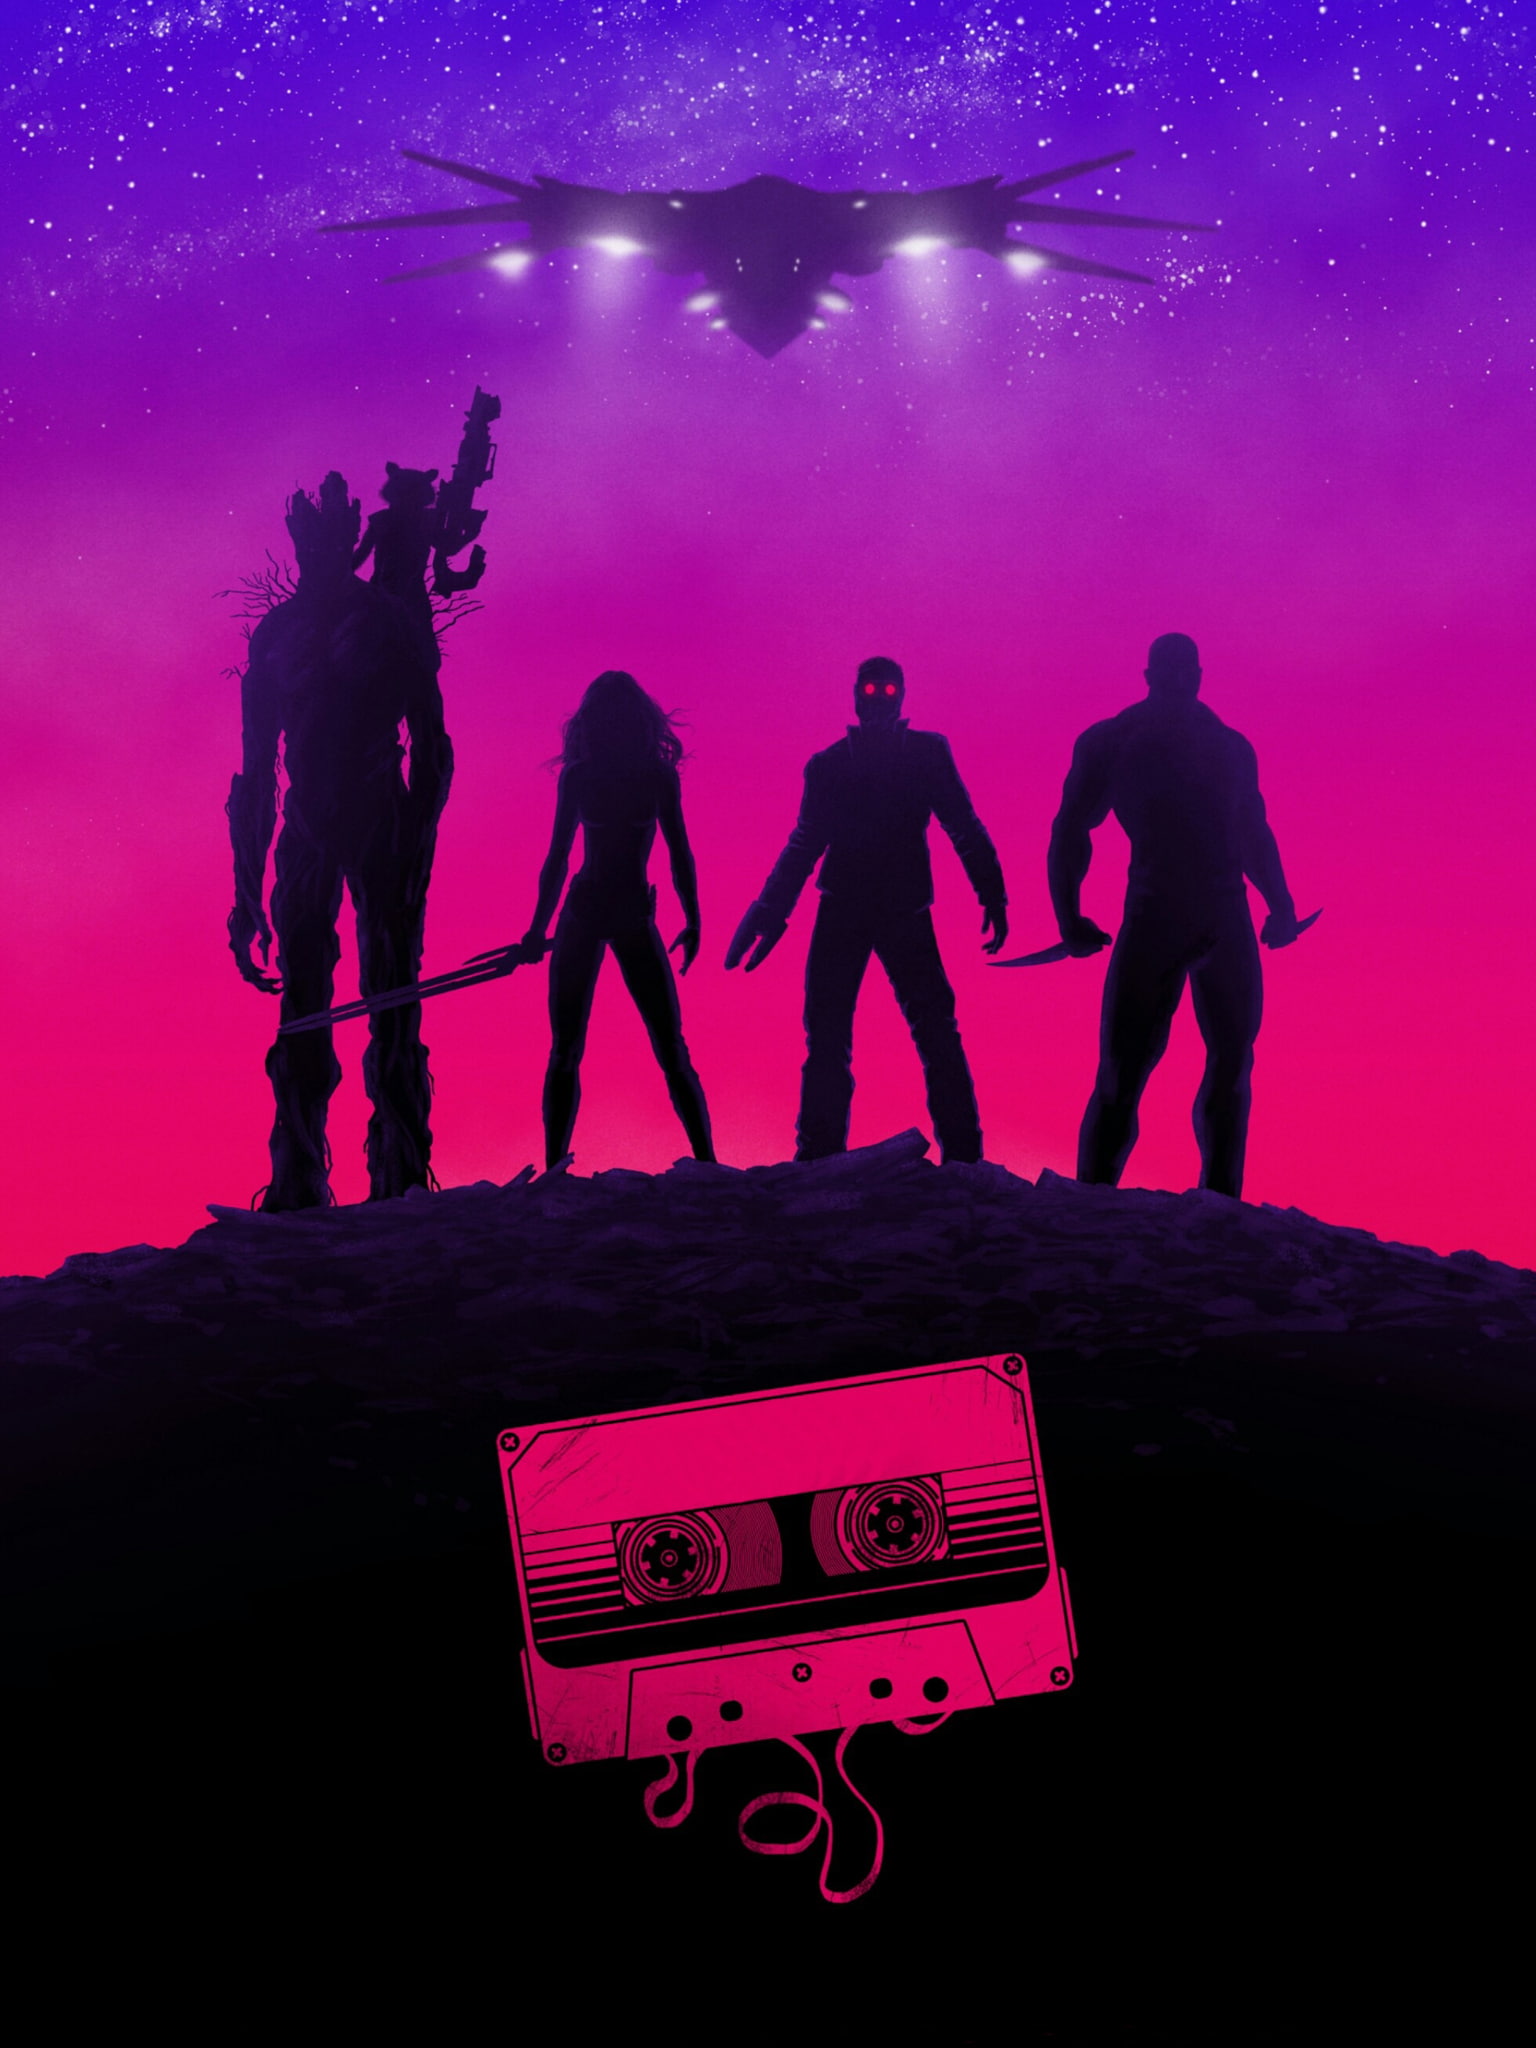 Guardians of the Galaxy, Marvel Cinematic Universe, cassette